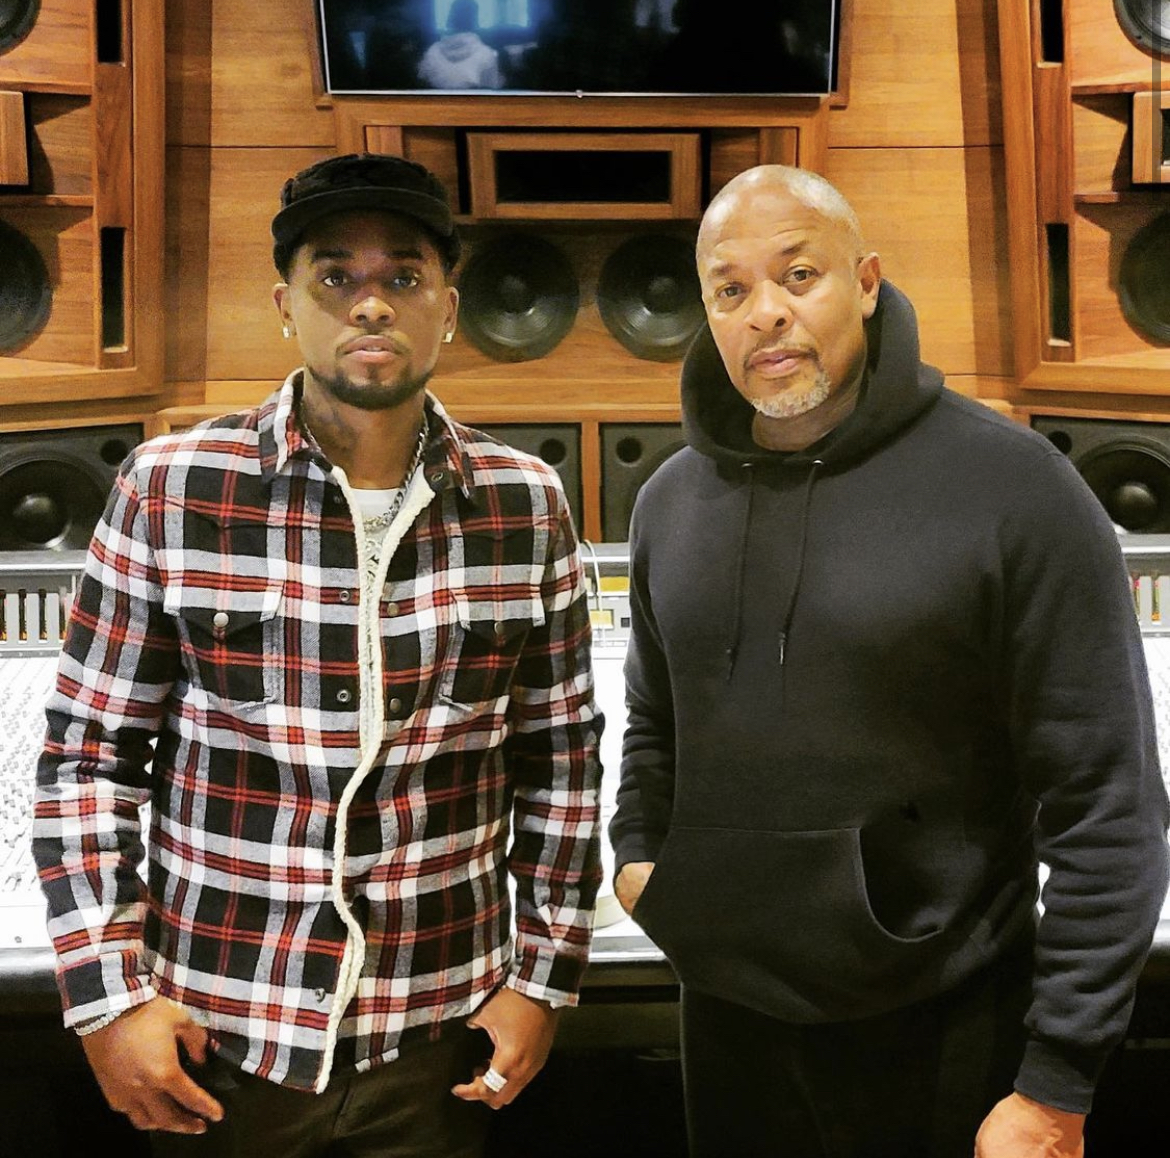 London On Da Track & Dr. Dre Might Spotted In The Studio Together: Dr. Dre Was F****** With Anything I Cooked Up Last Night!